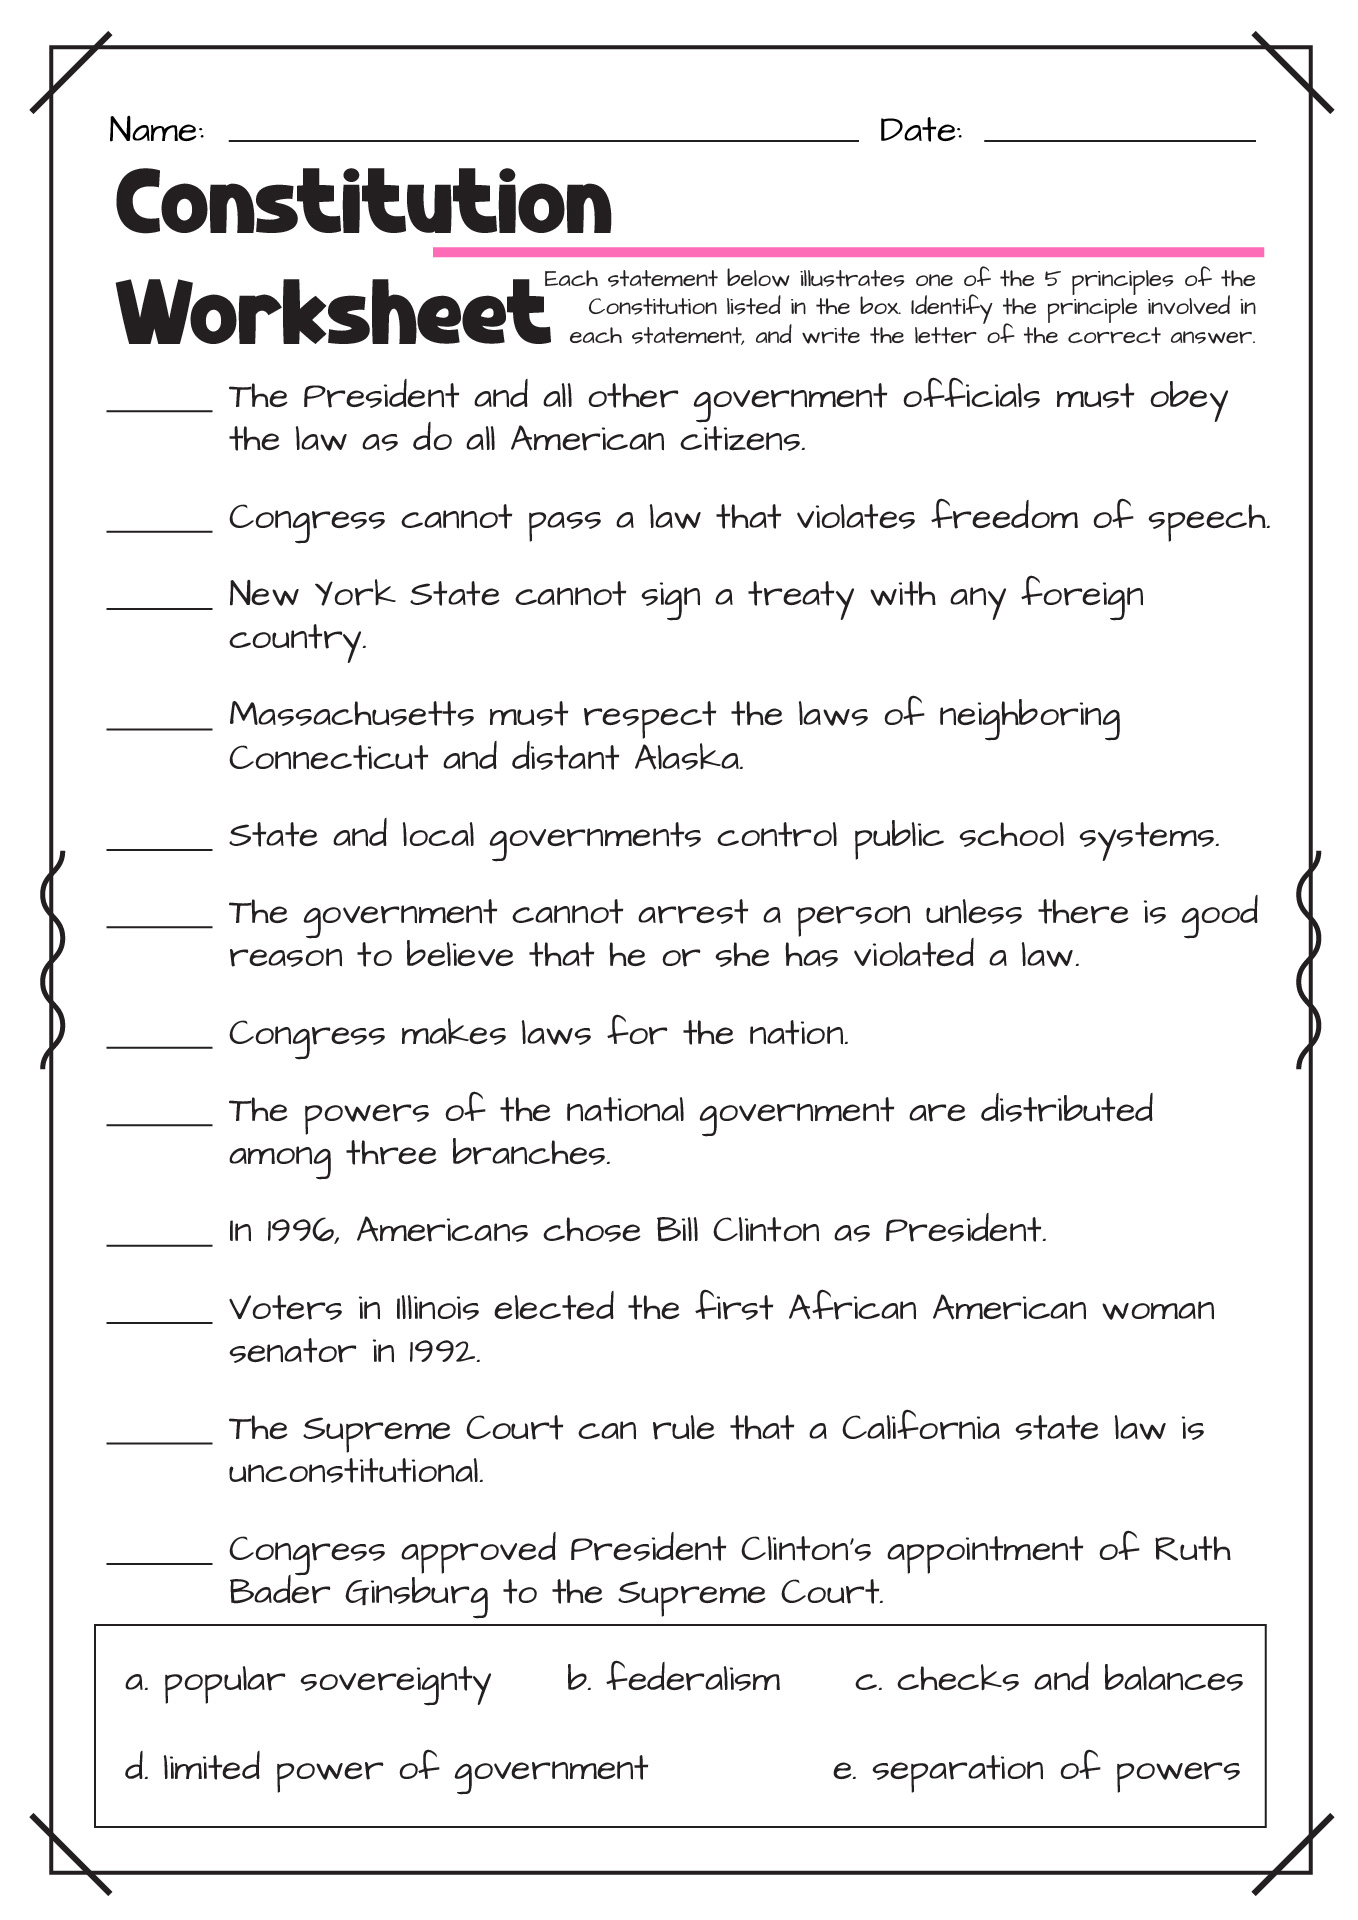 changing-the-constitution-worksheet-answers-icivics-db-excel